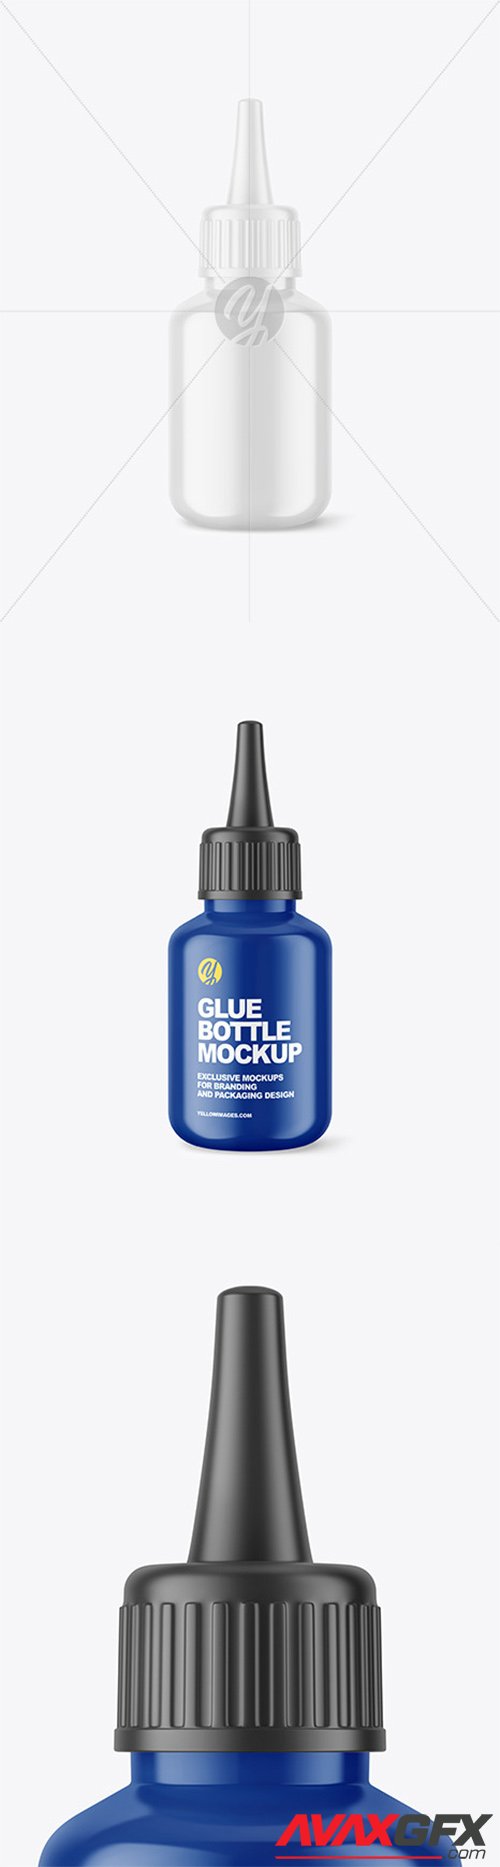 Download Glossy Glue Bottle Mockup 66588 Avaxgfx All Downloads That You Need In One Place Graphic From Nitroflare Rapidgator